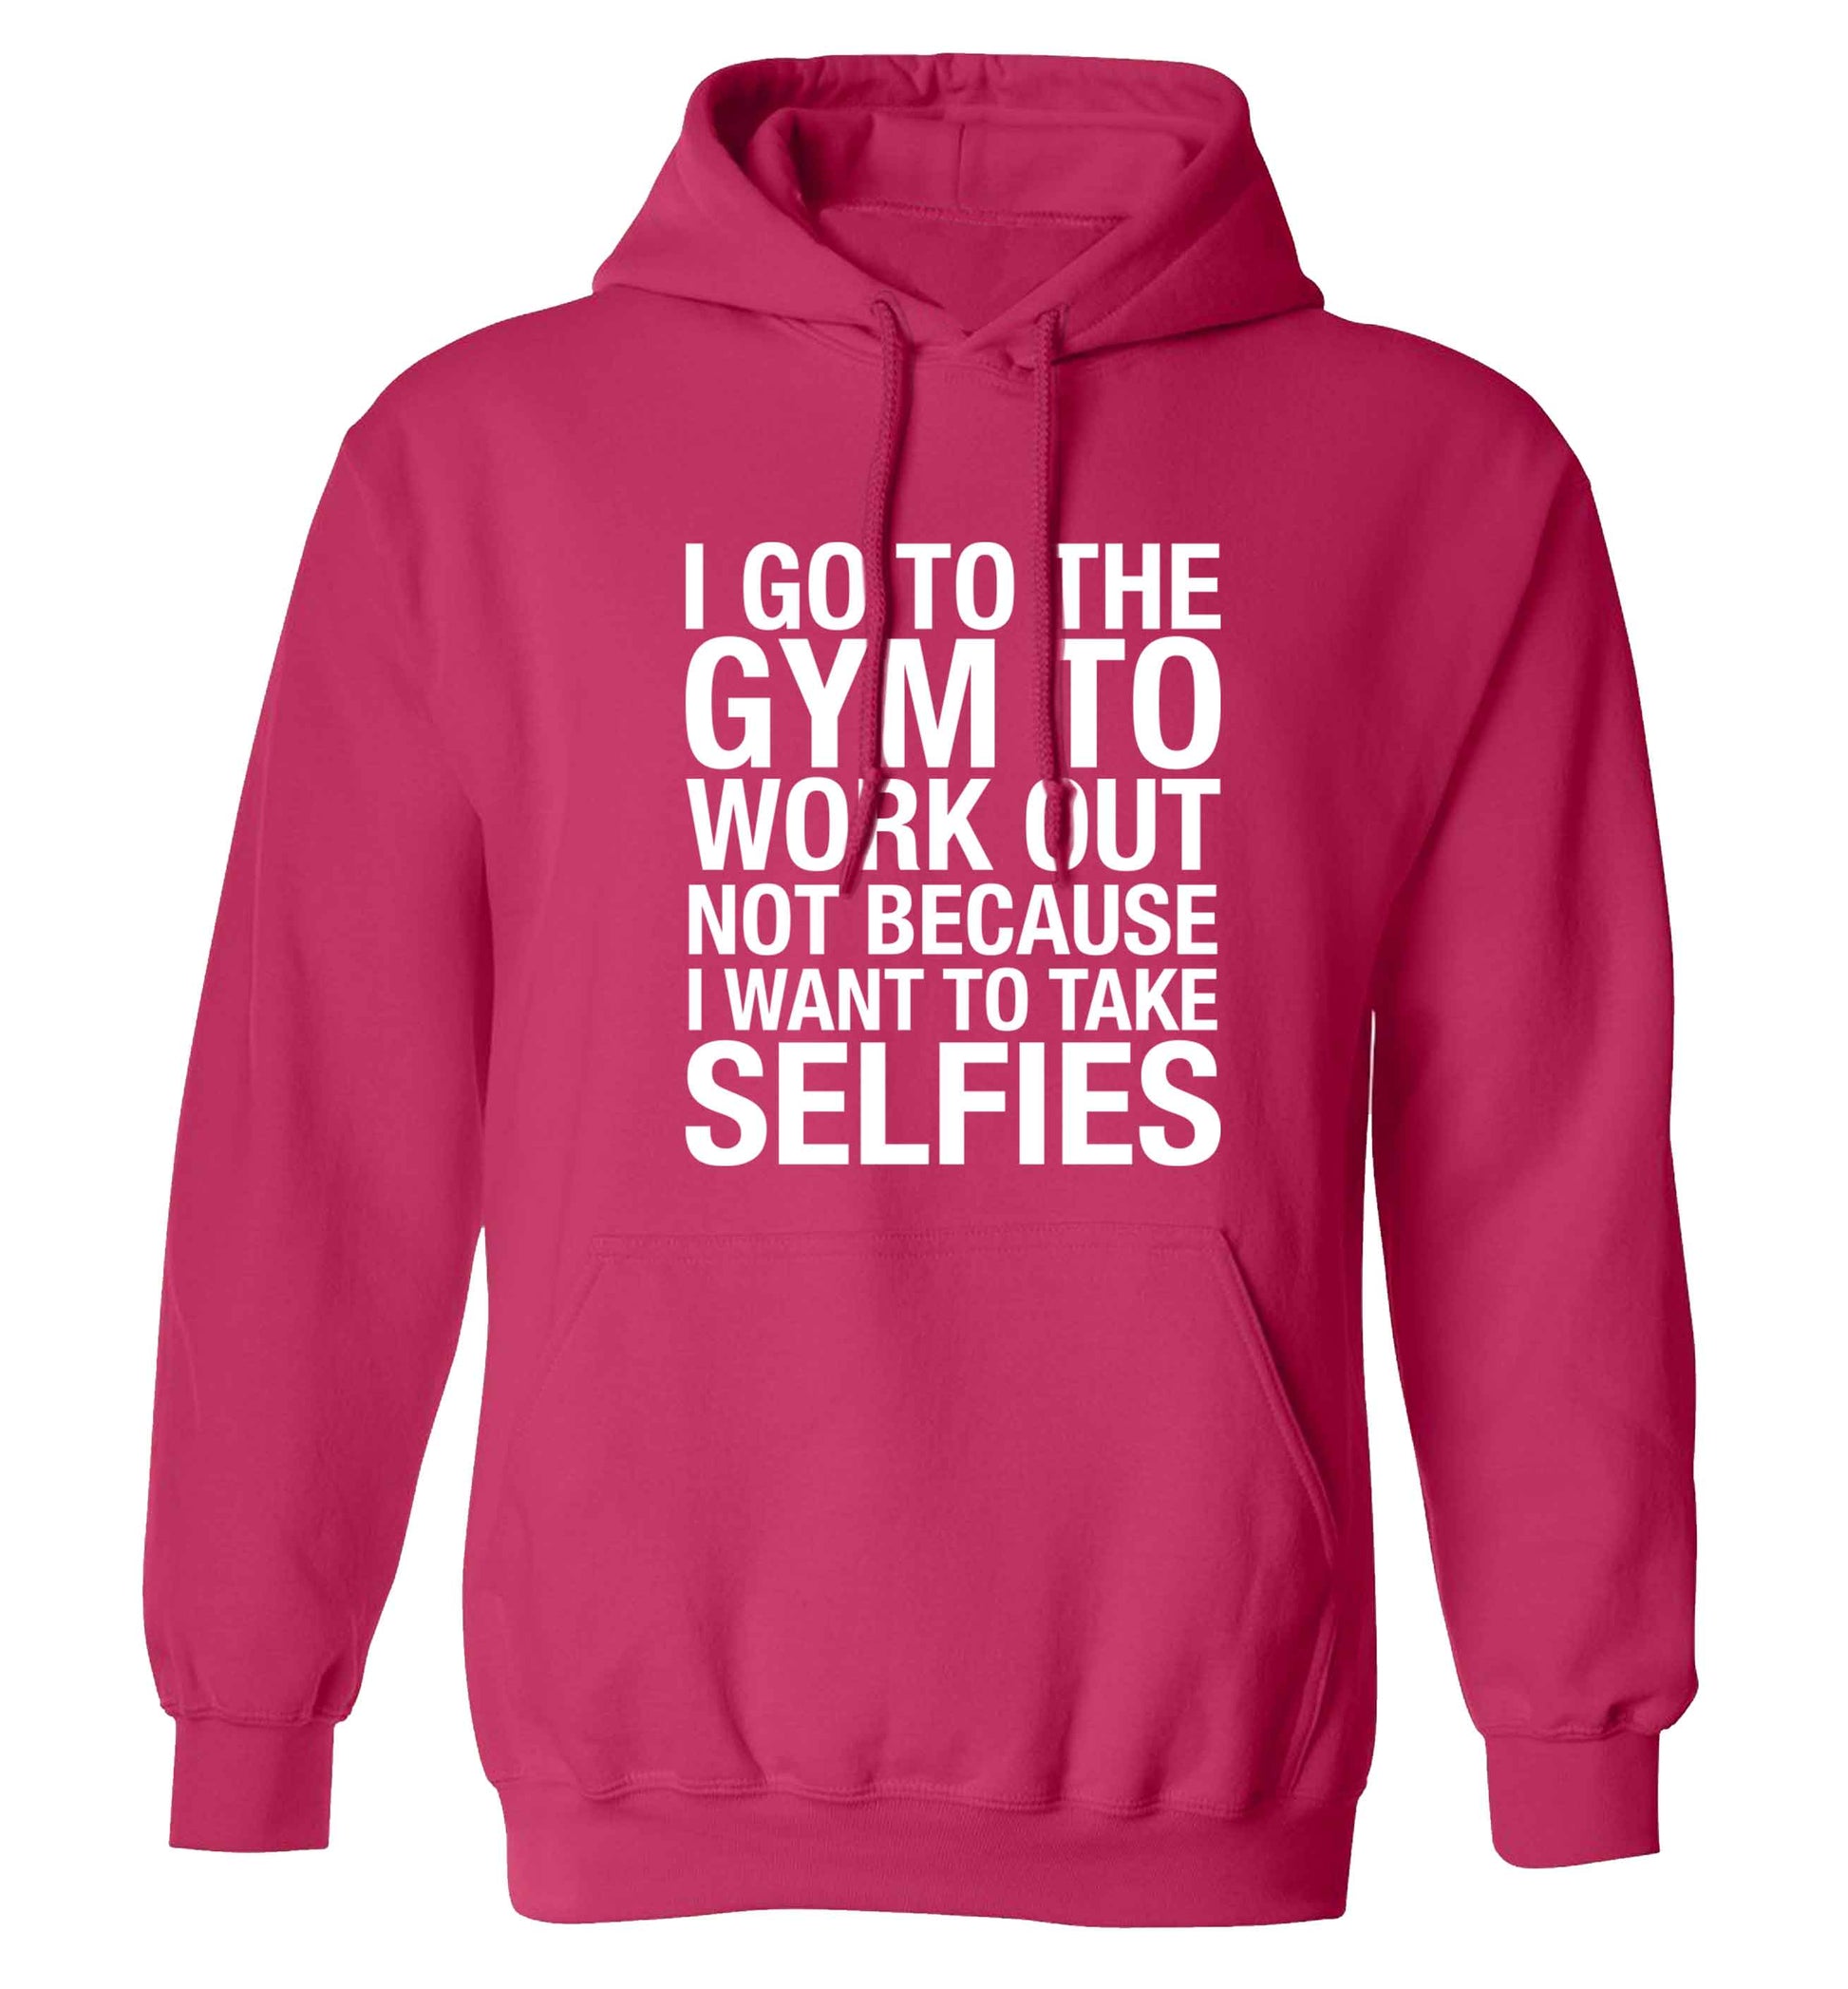 I go to the gym to workout not to take selfies adults unisex pink hoodie 2XL